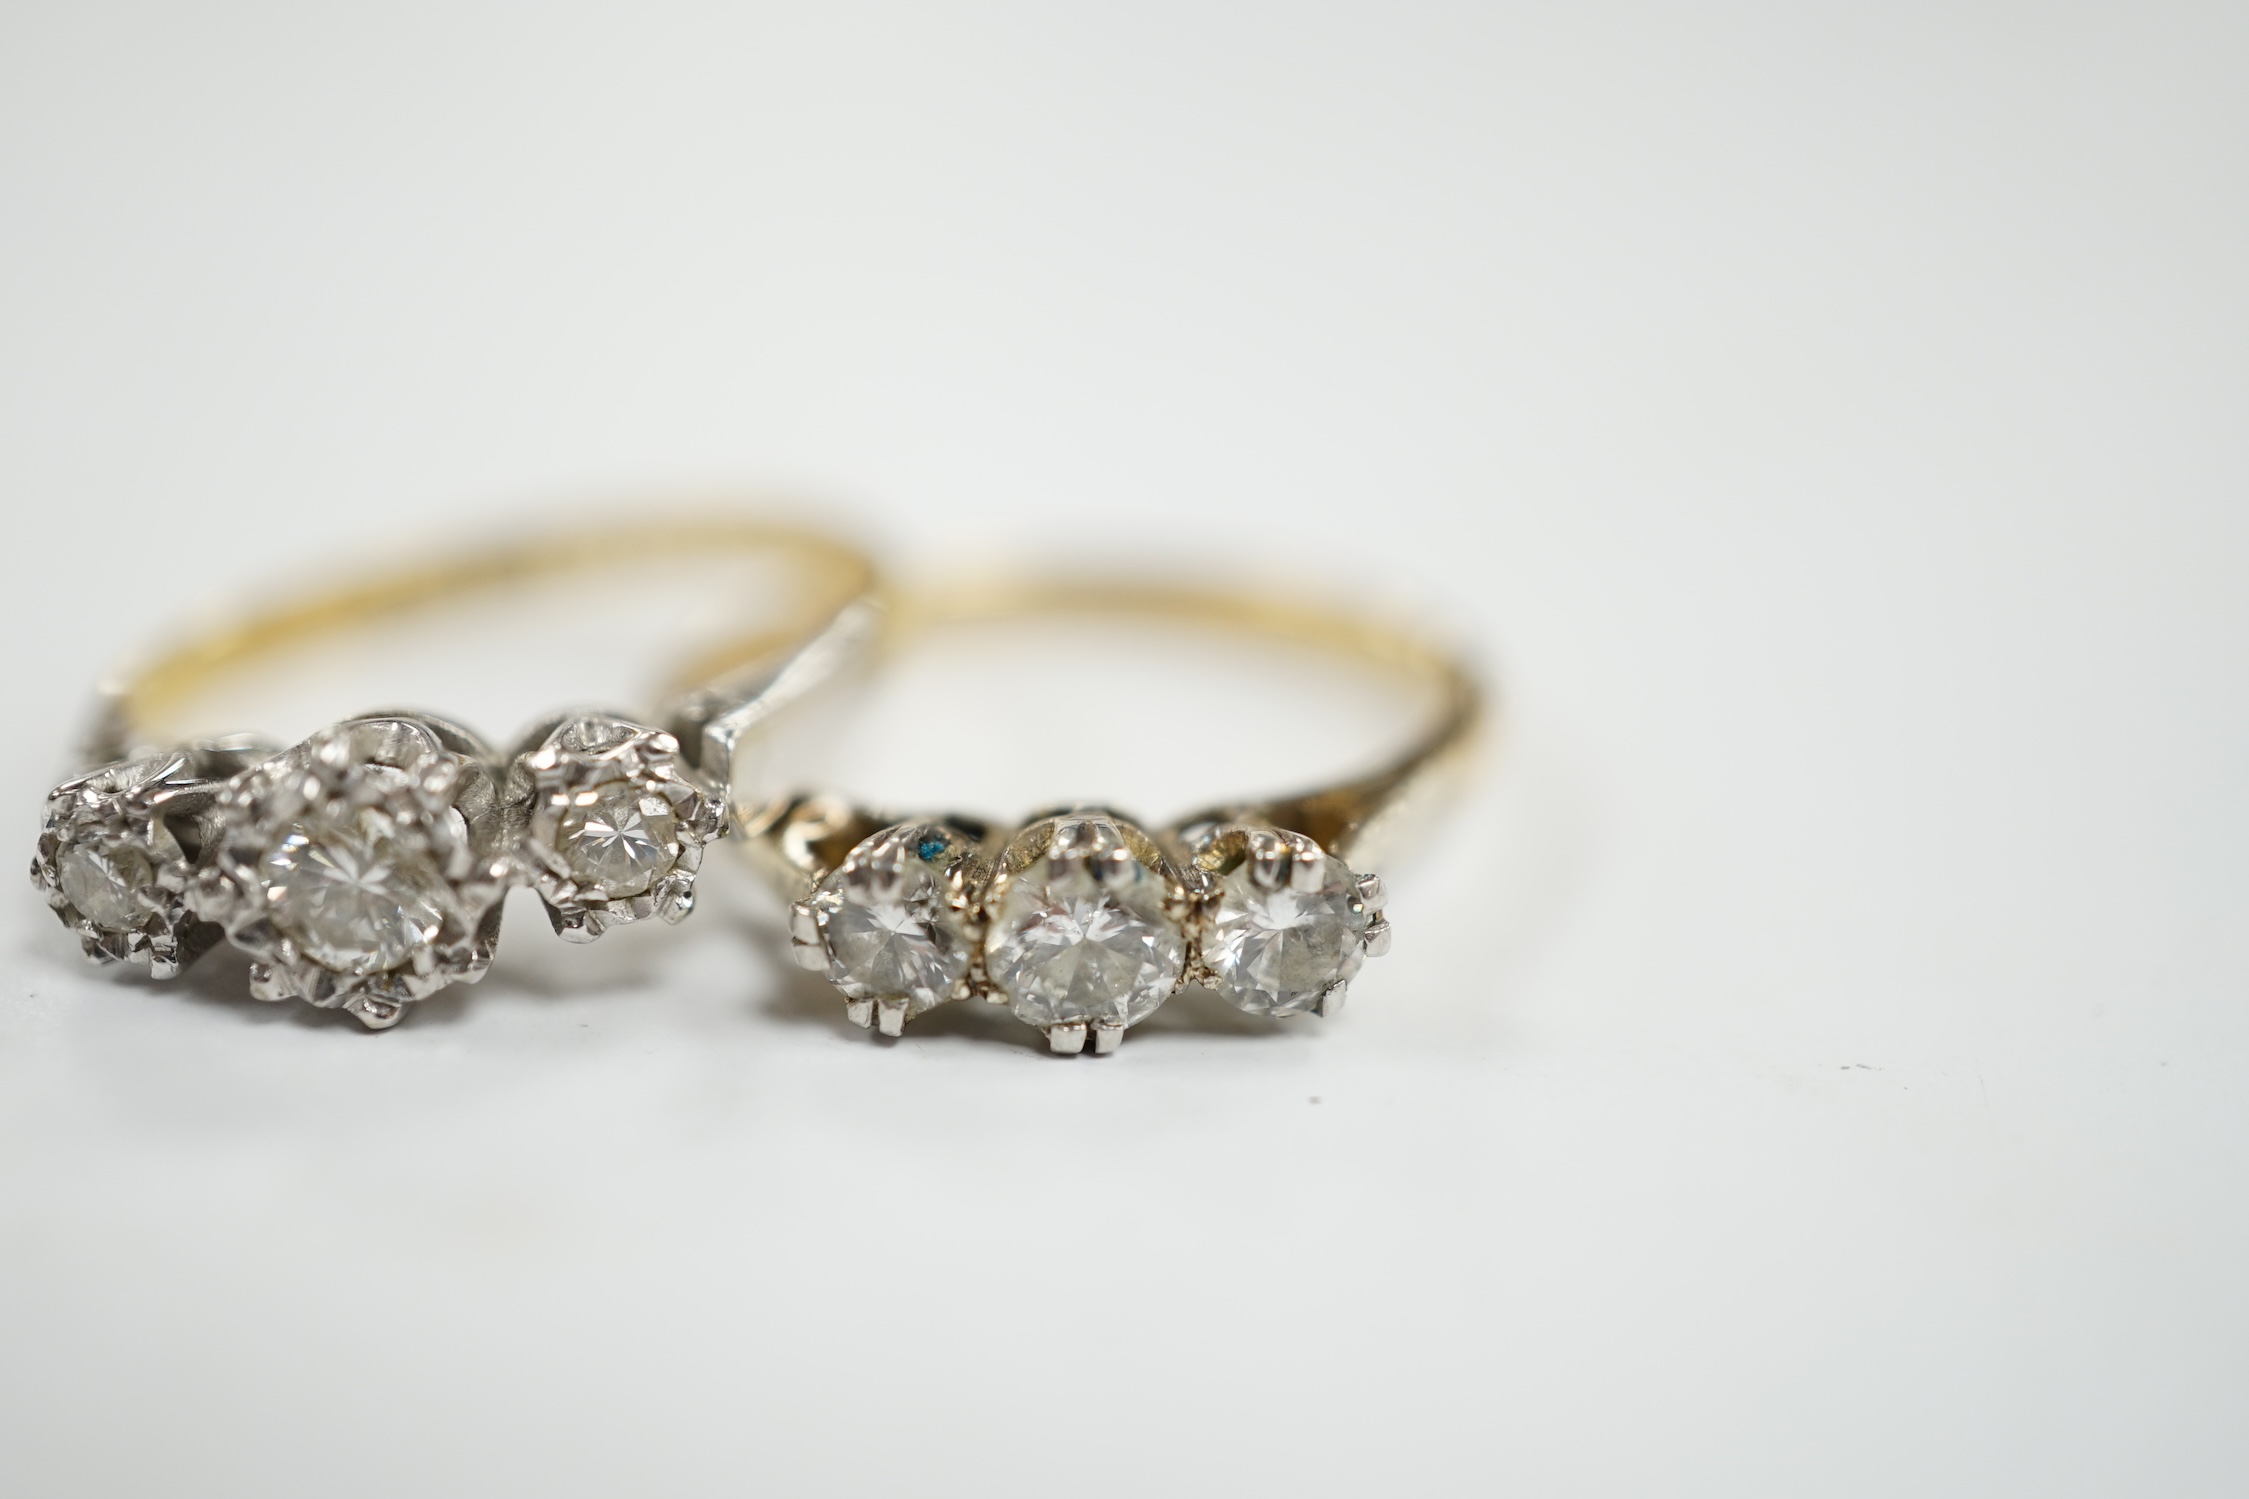 Two 18ct, plate and illusion set three stone diamond rings, sizes O & P, gross weight 6.3 grams. Condition - fair to good